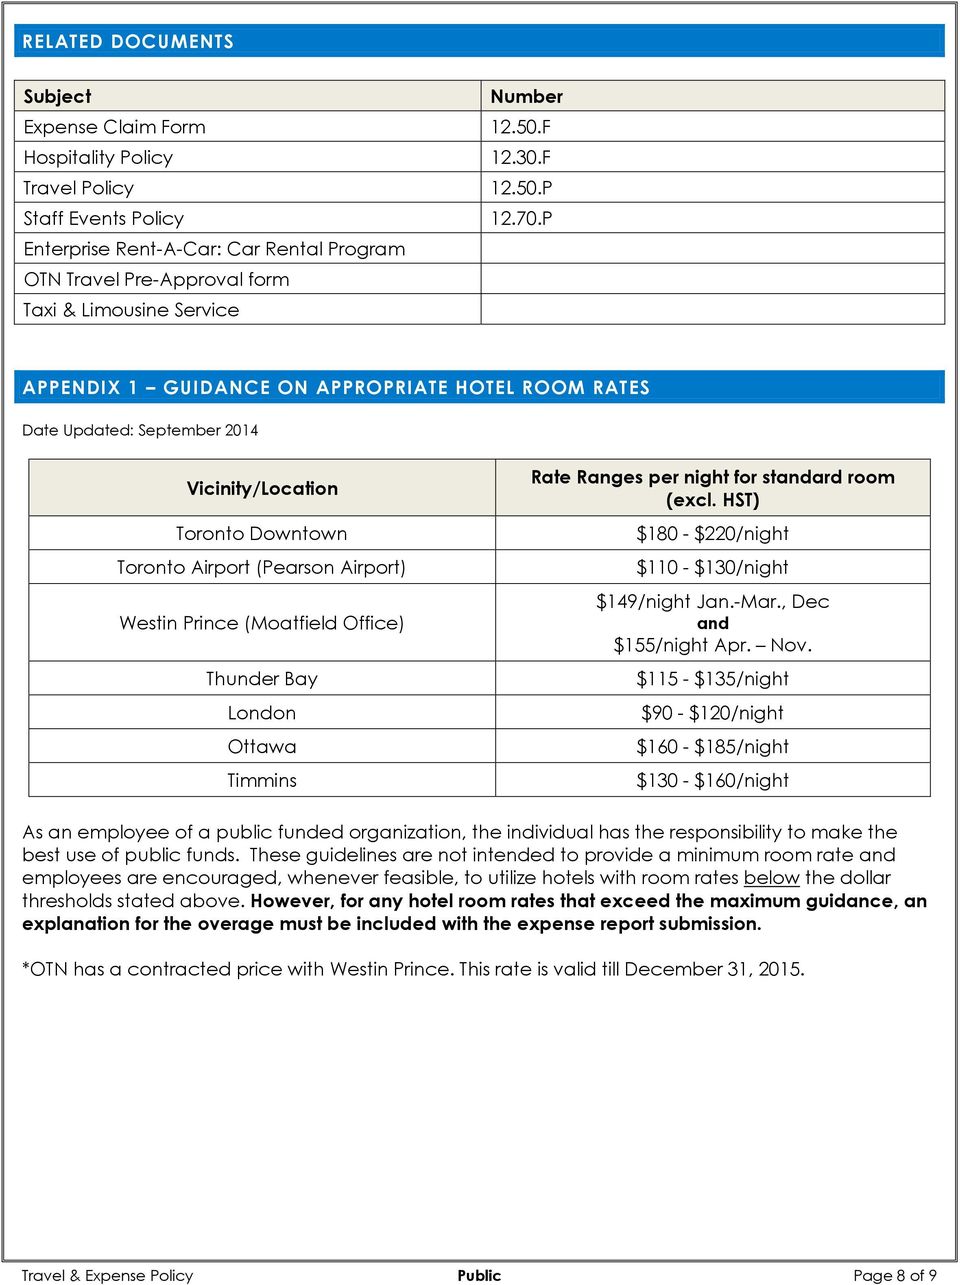 P APPENDIX 1 GUIDANCE ON APPROPRIATE HOTEL ROOM RATES Date Updated: September 2014 Vicinity/Location Toronto Downtown Toronto Airport (Pearson Airport) Westin Prince (Moatfield Office) Thunder Bay